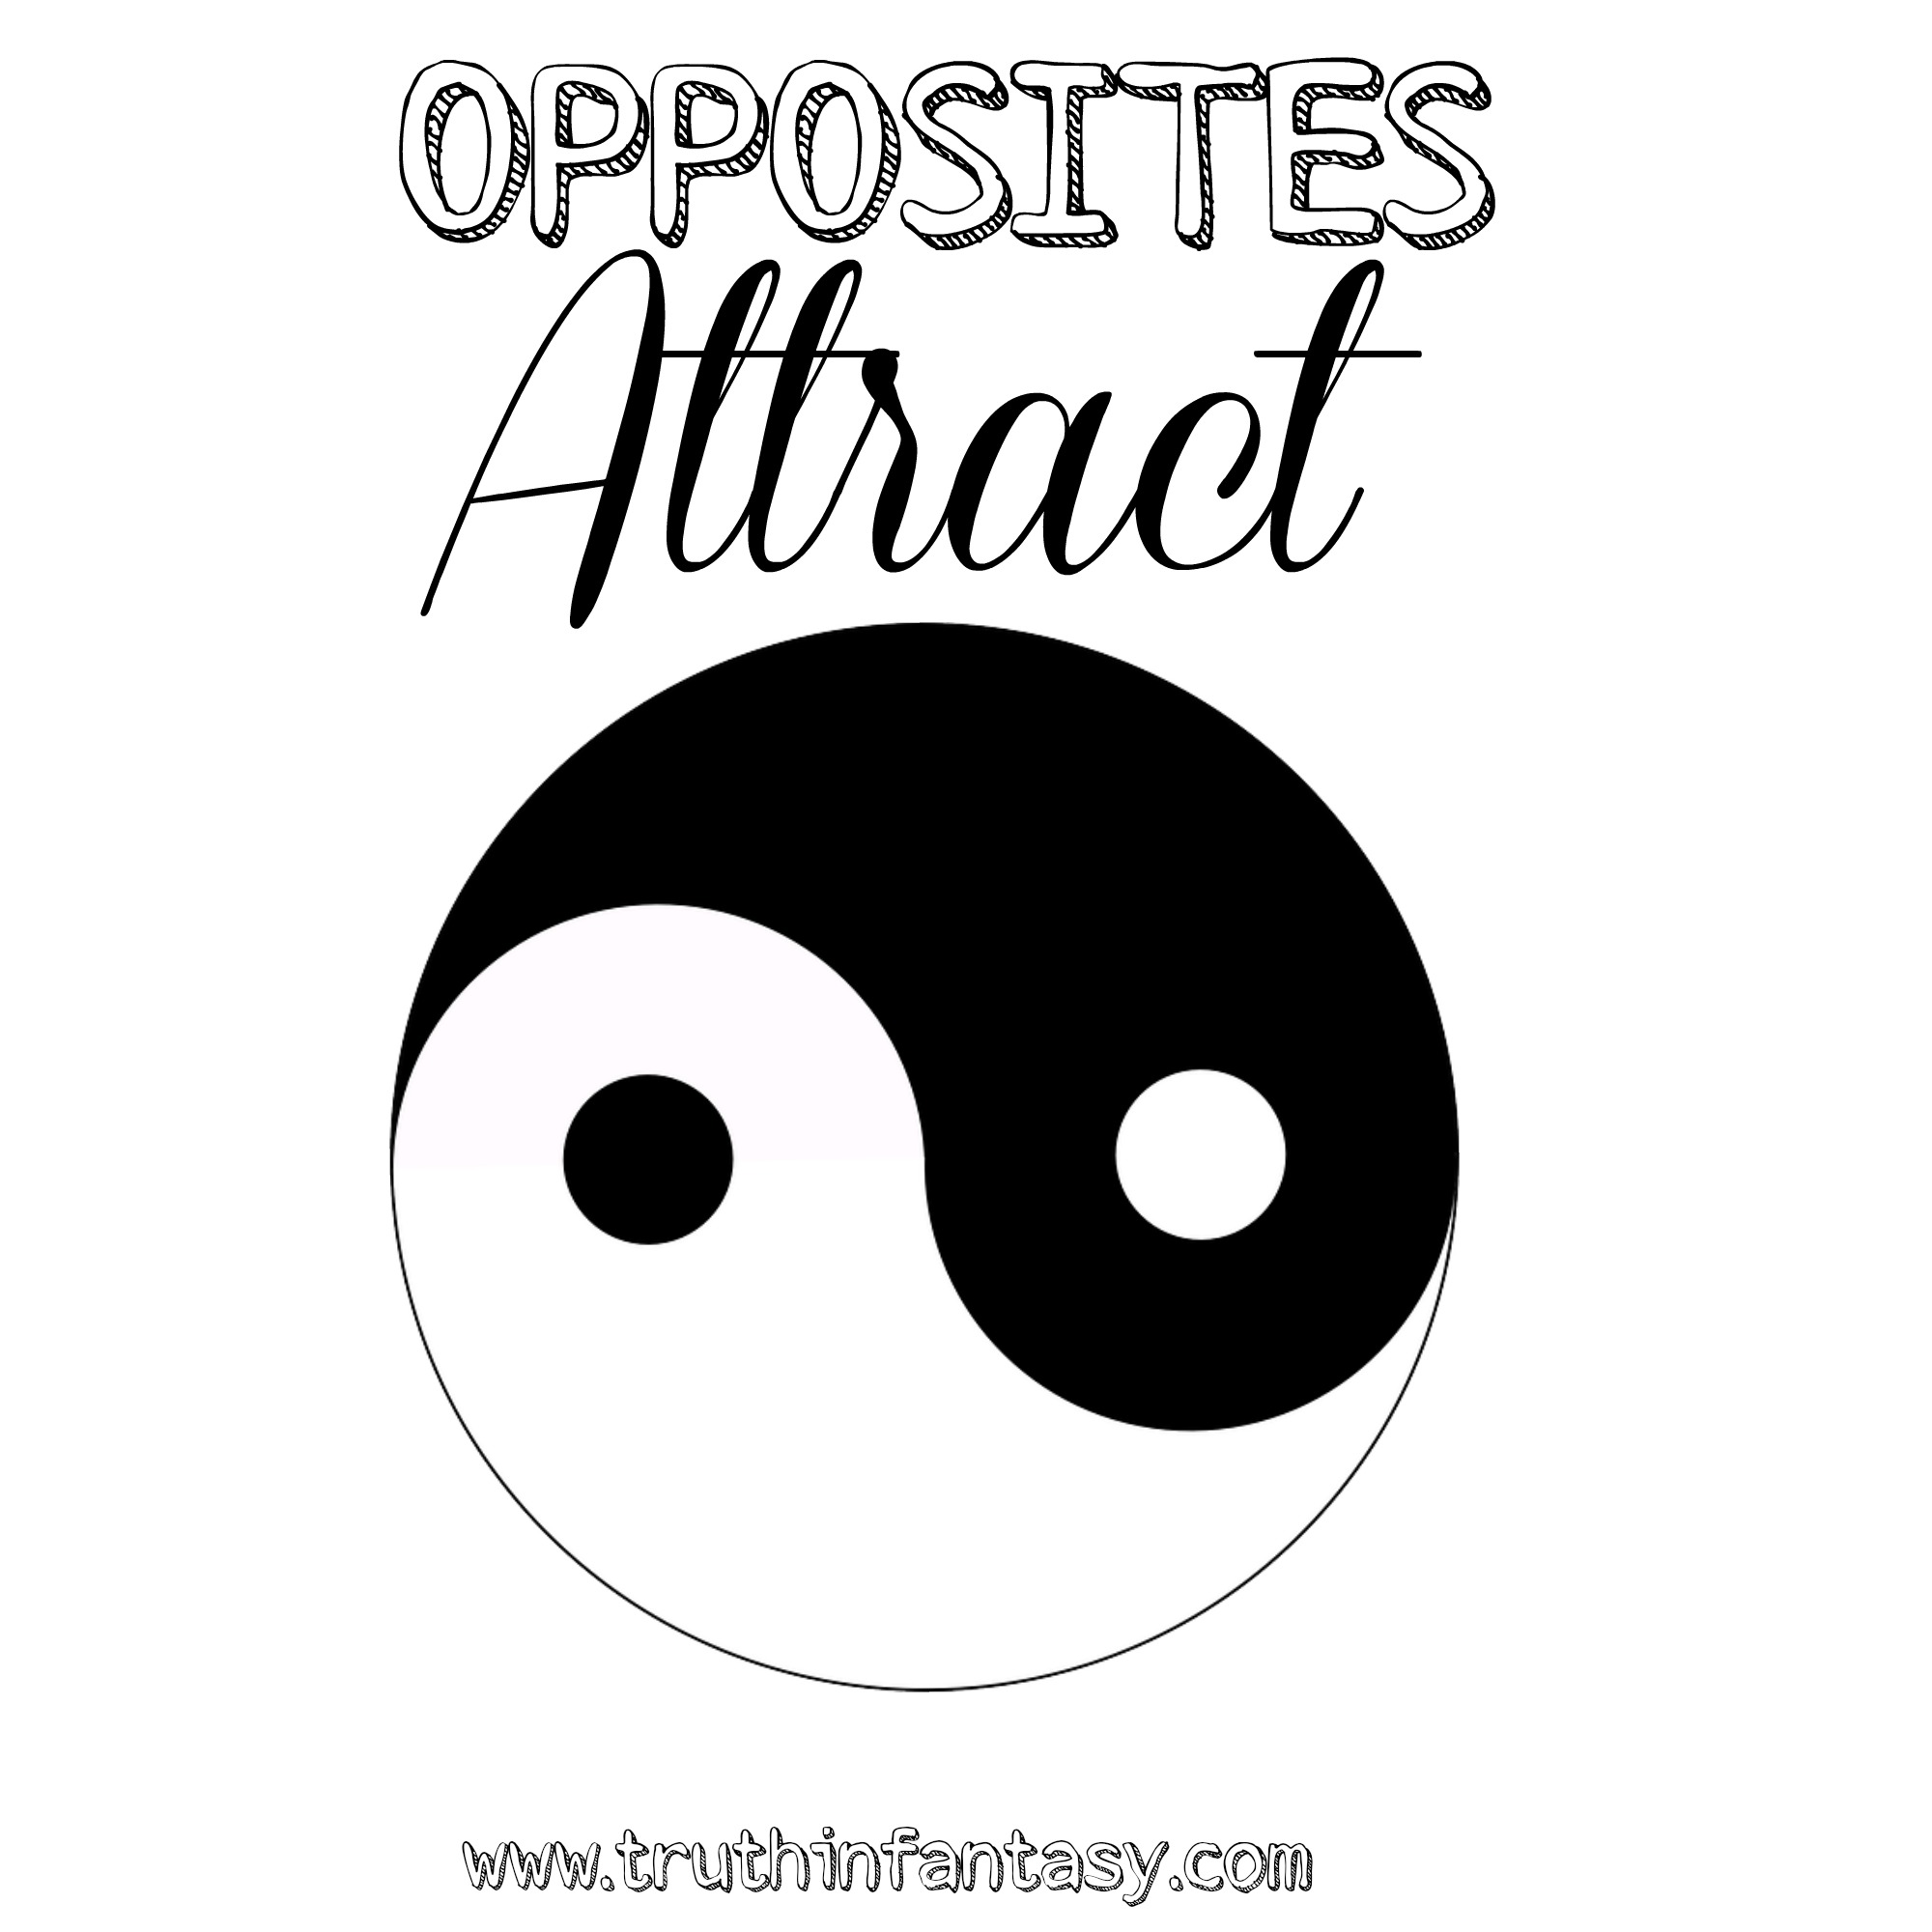 Opposites Attract — Truth in Fantasy